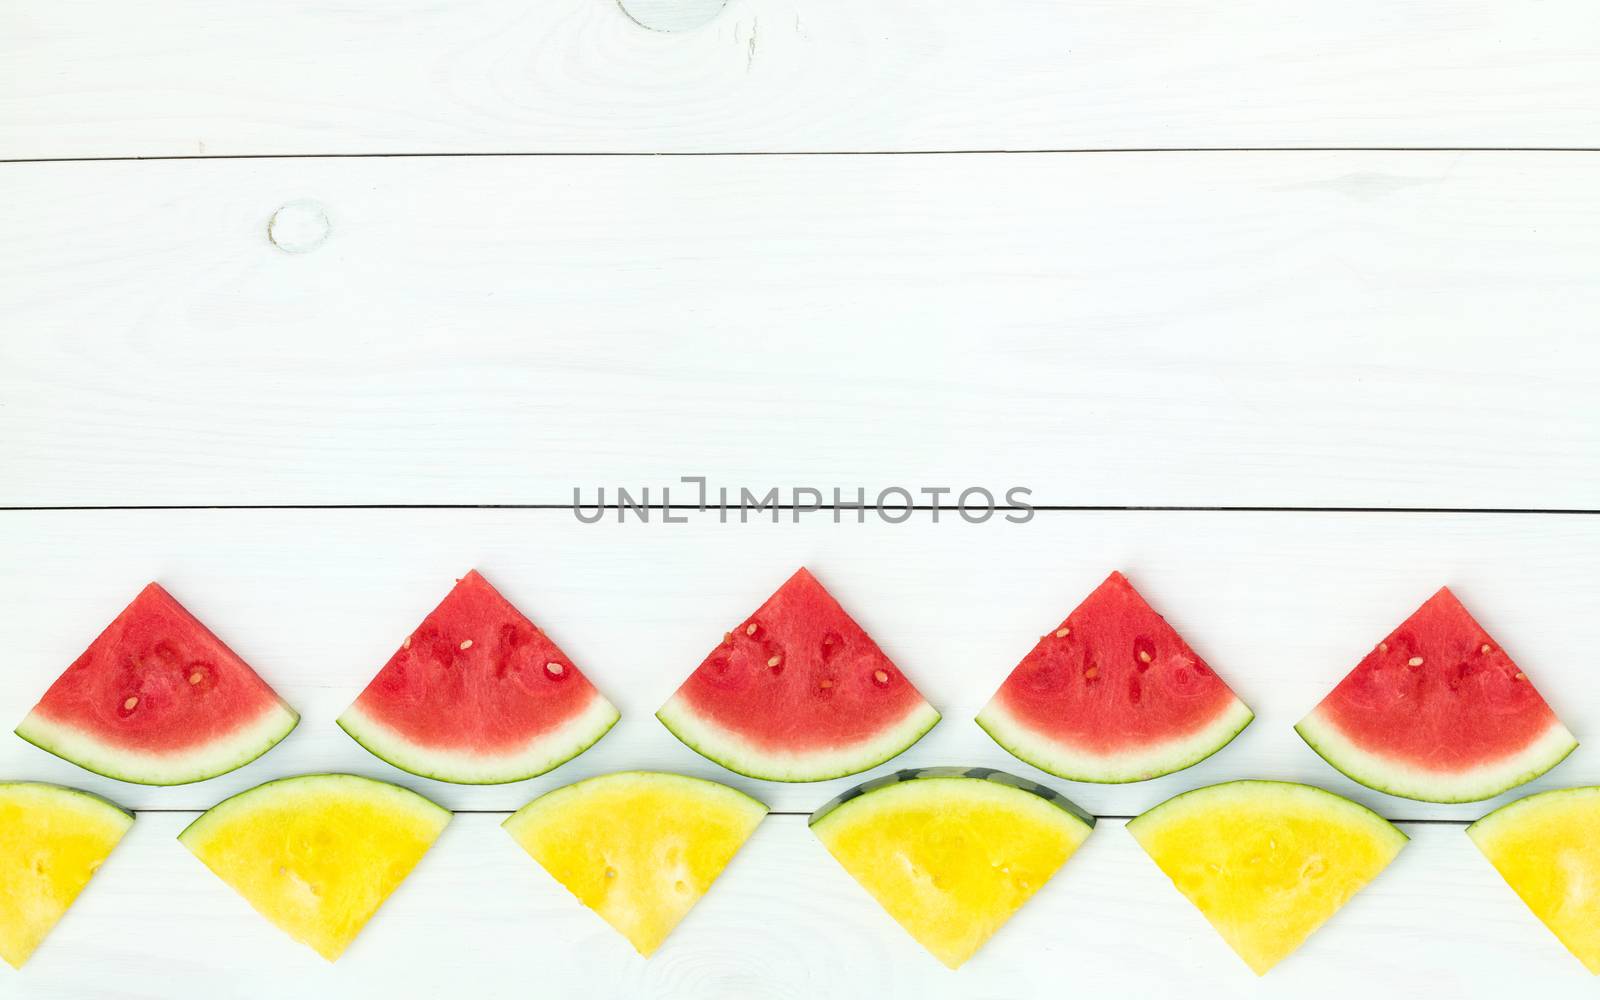 Red and yellow watermelon slices on wooden sticks on a white wooden background. Flat lay, top view, copy space